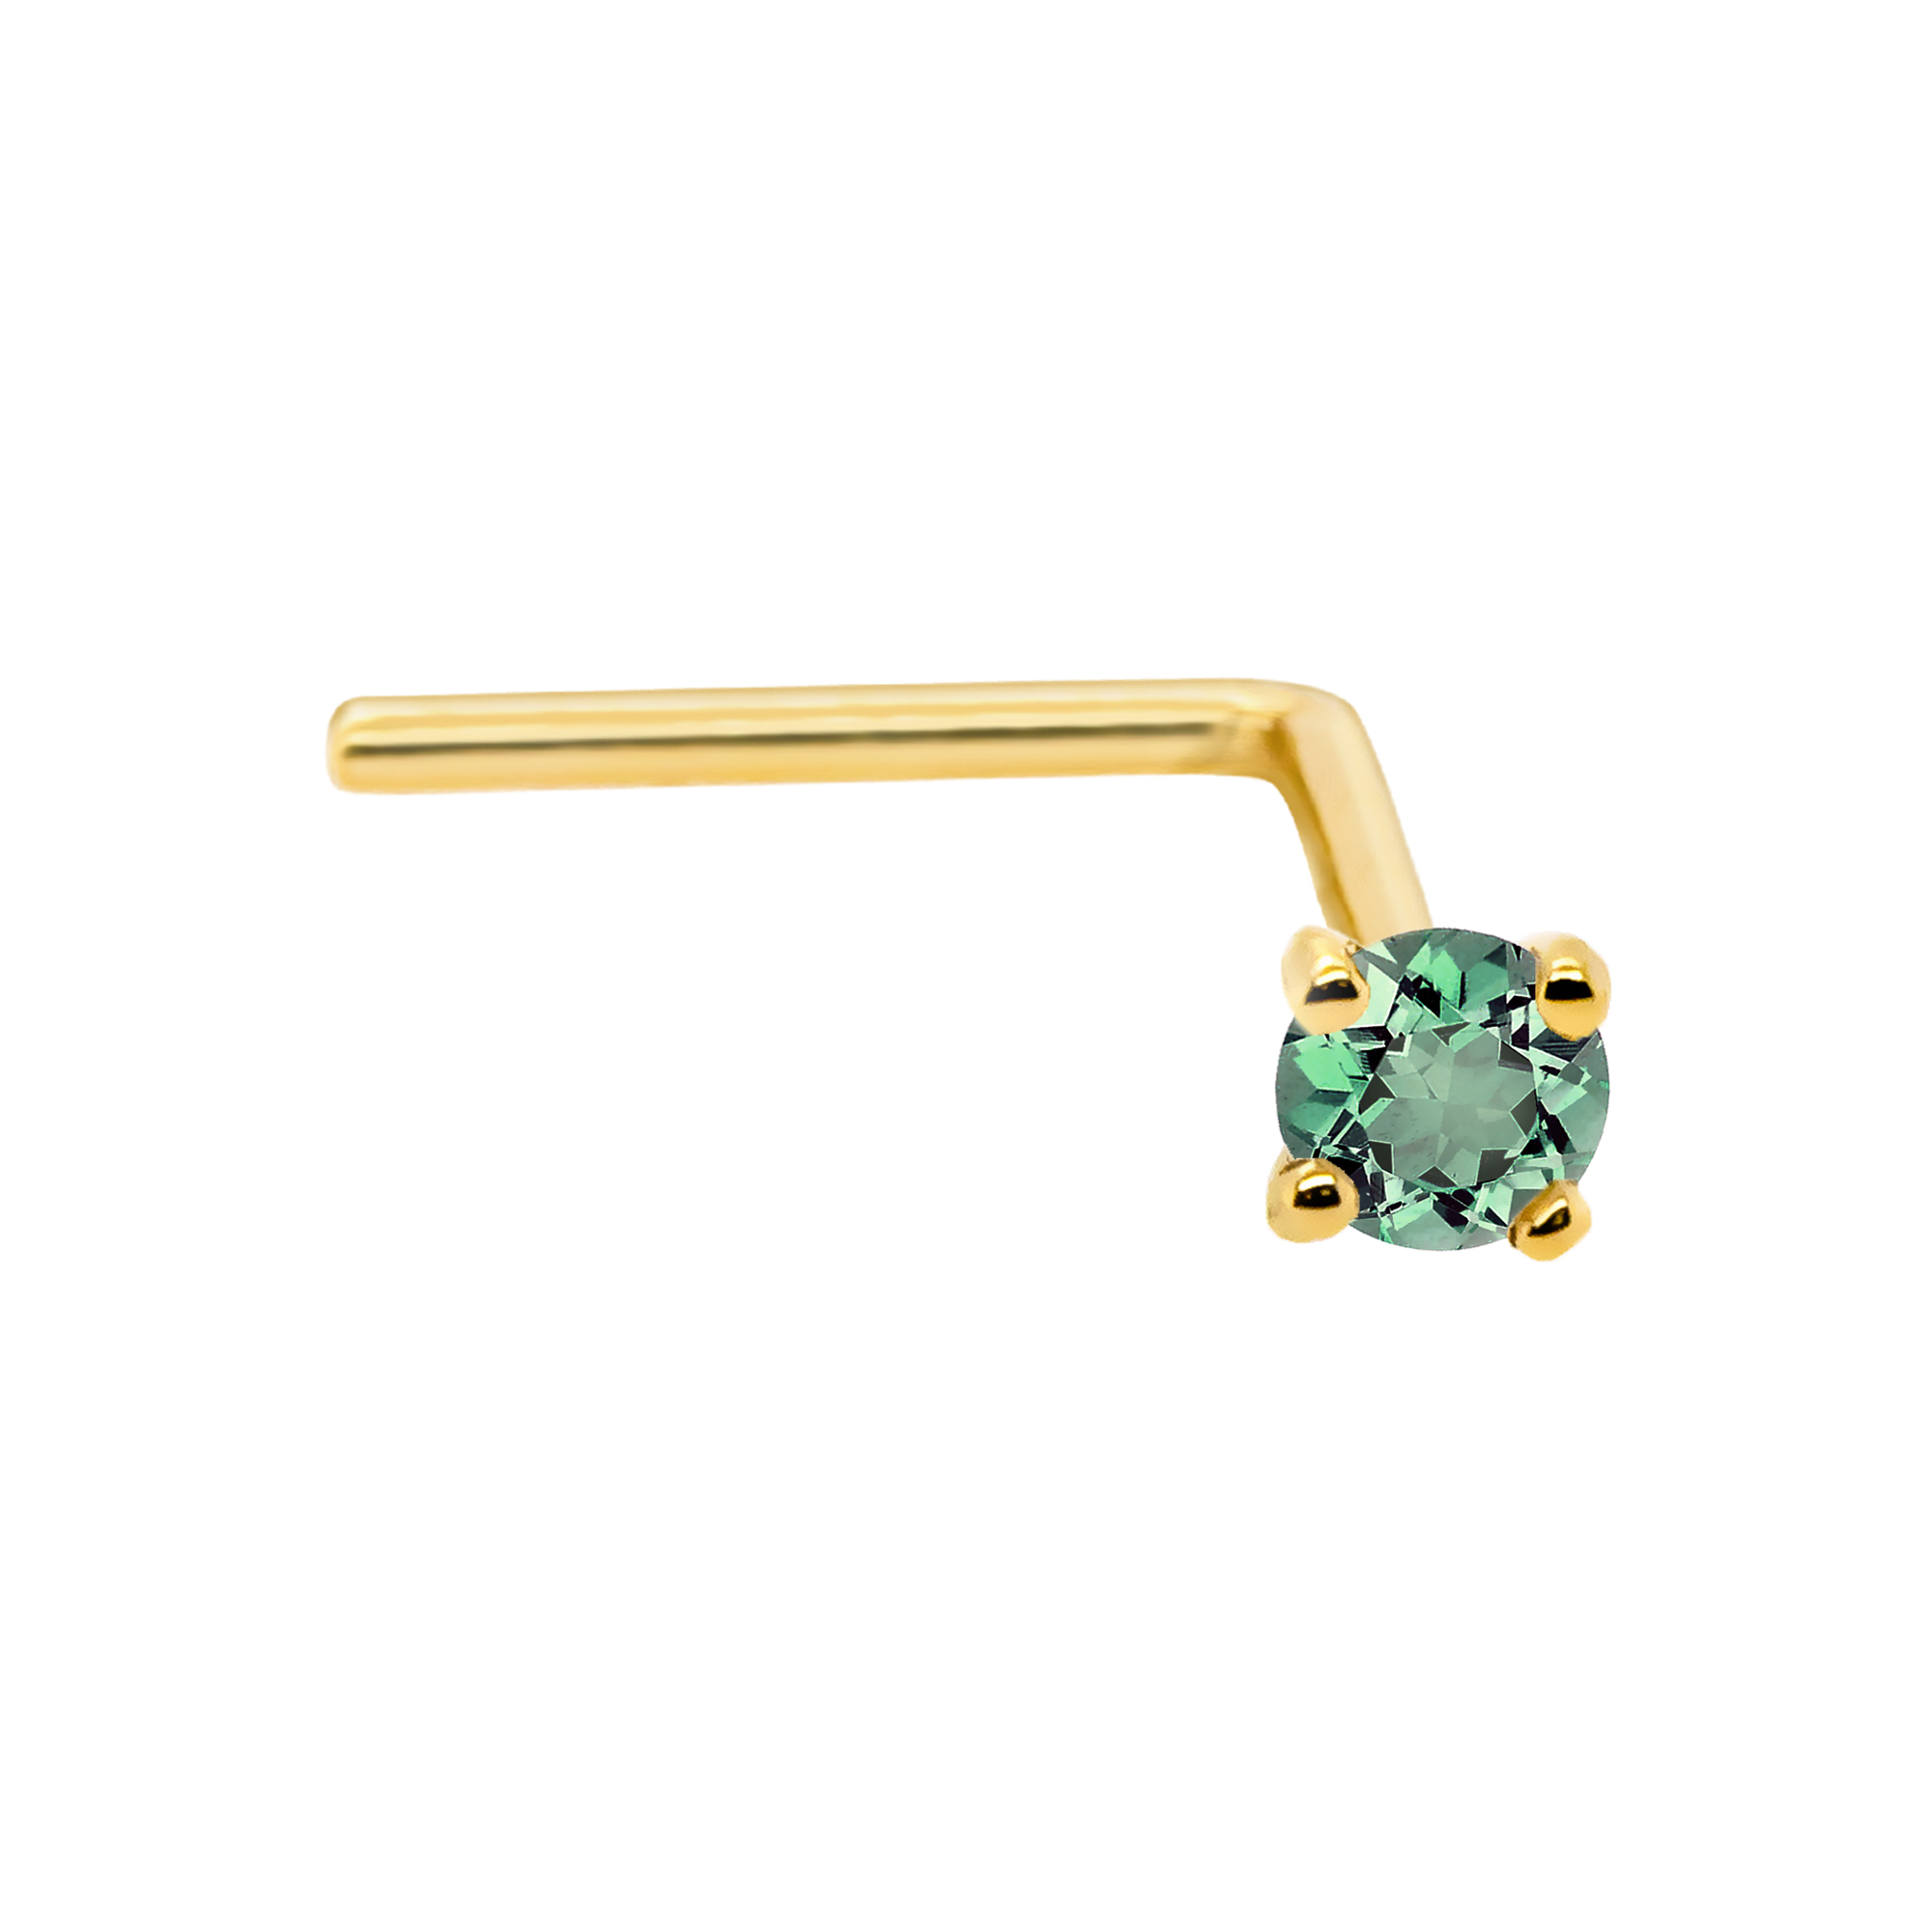 22G Solid 14Kt Gold L-Shape Nose Stud with real Alexandrite Gemstone, 14kt Yellow Gold or 14kt White Gold Prong Setting - June Birthstone Nose Ring